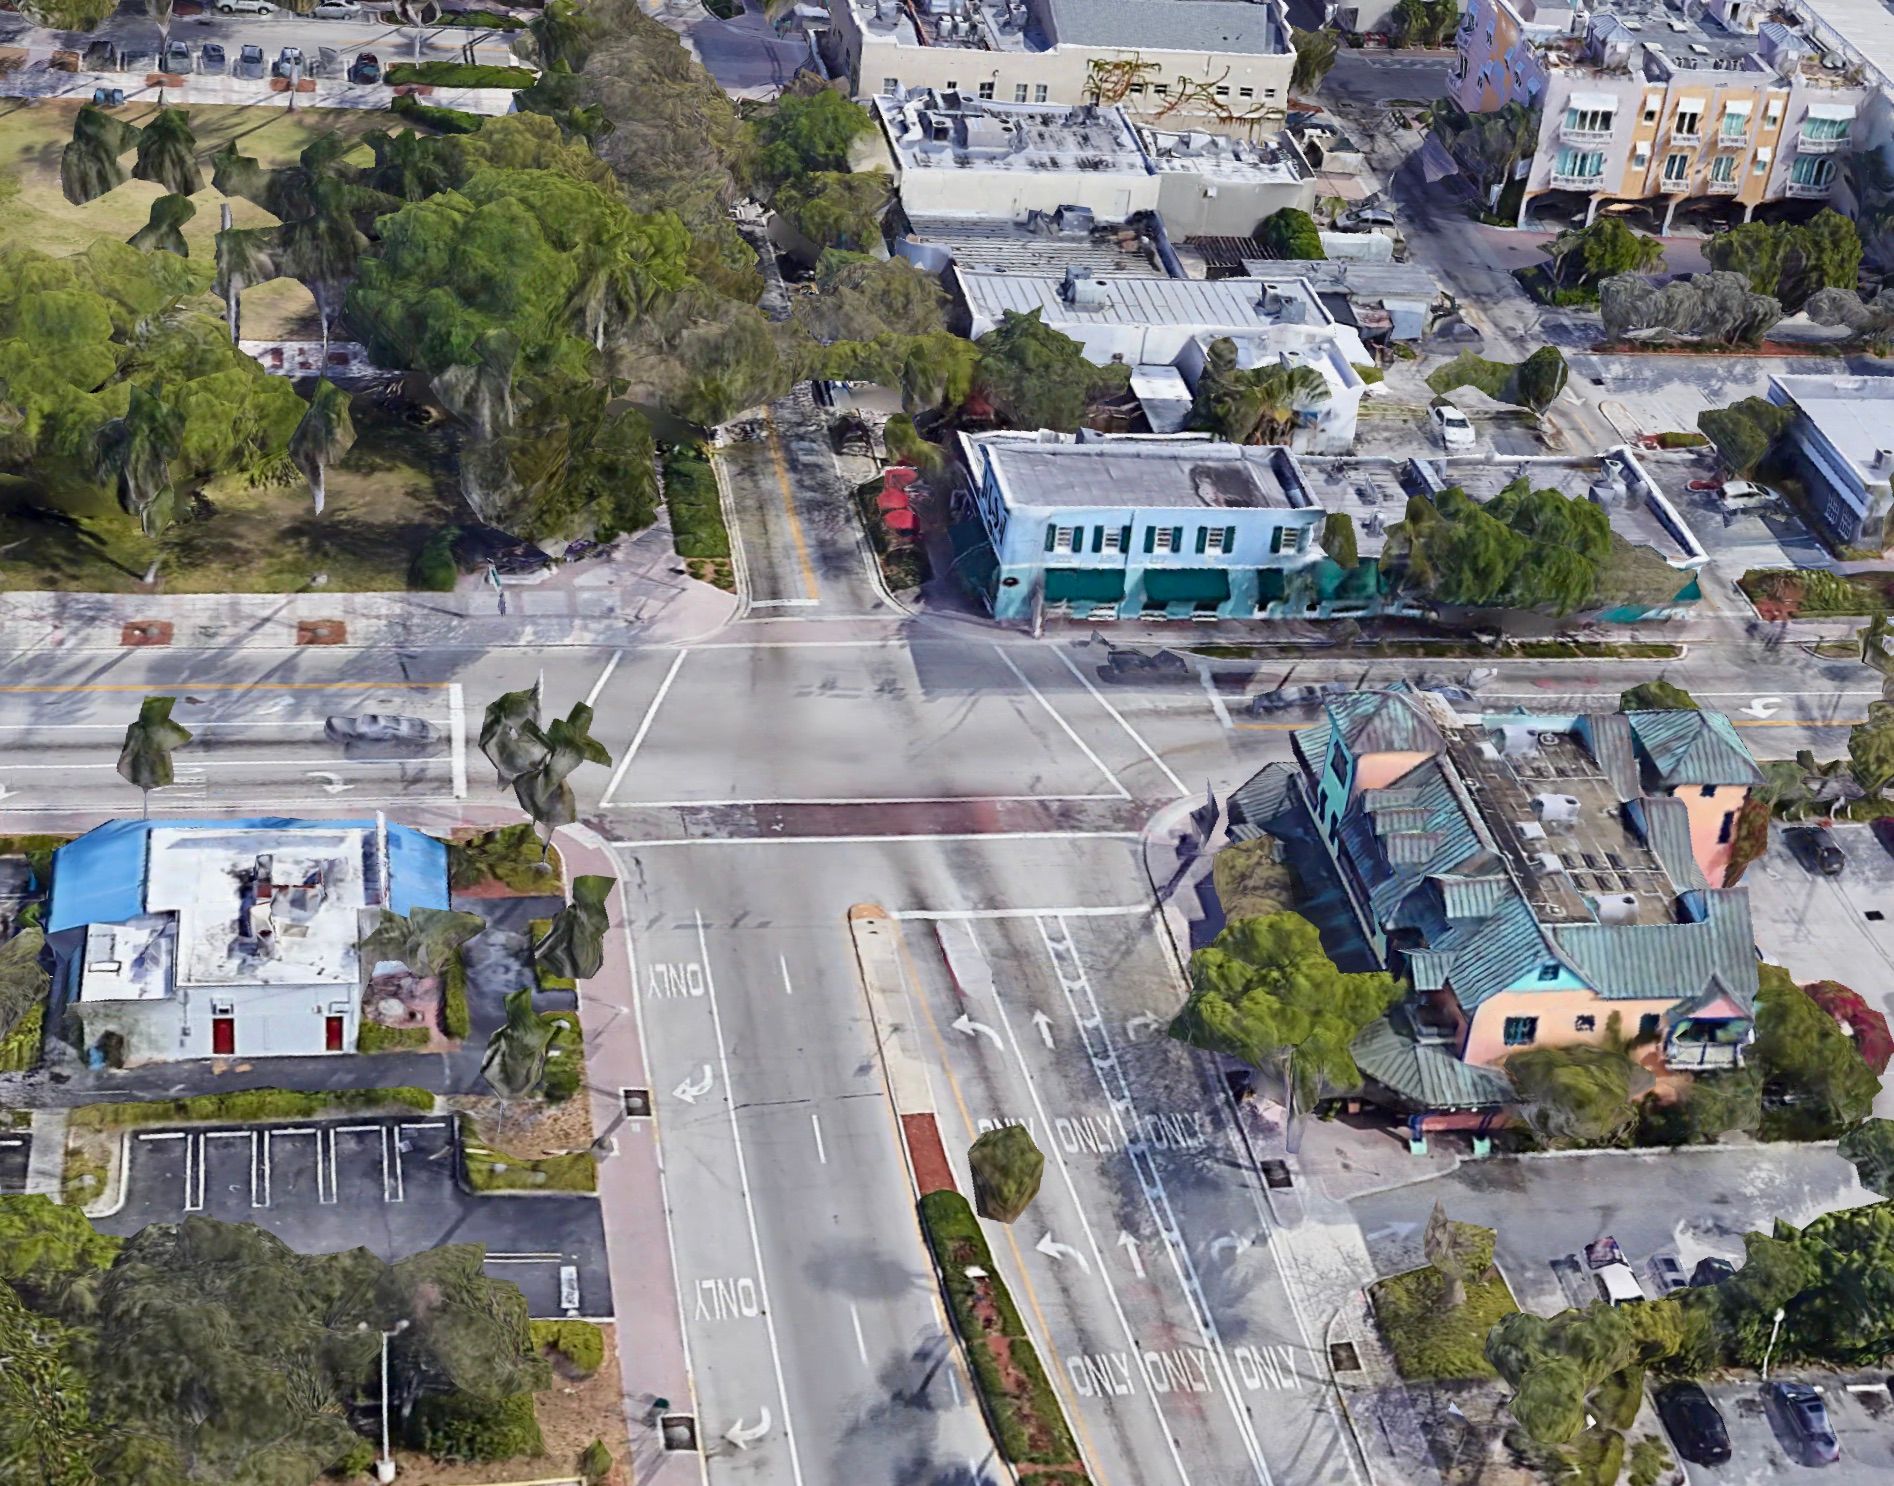 A Placemaking Strategy for Creating "Village Life" in Delray Beach